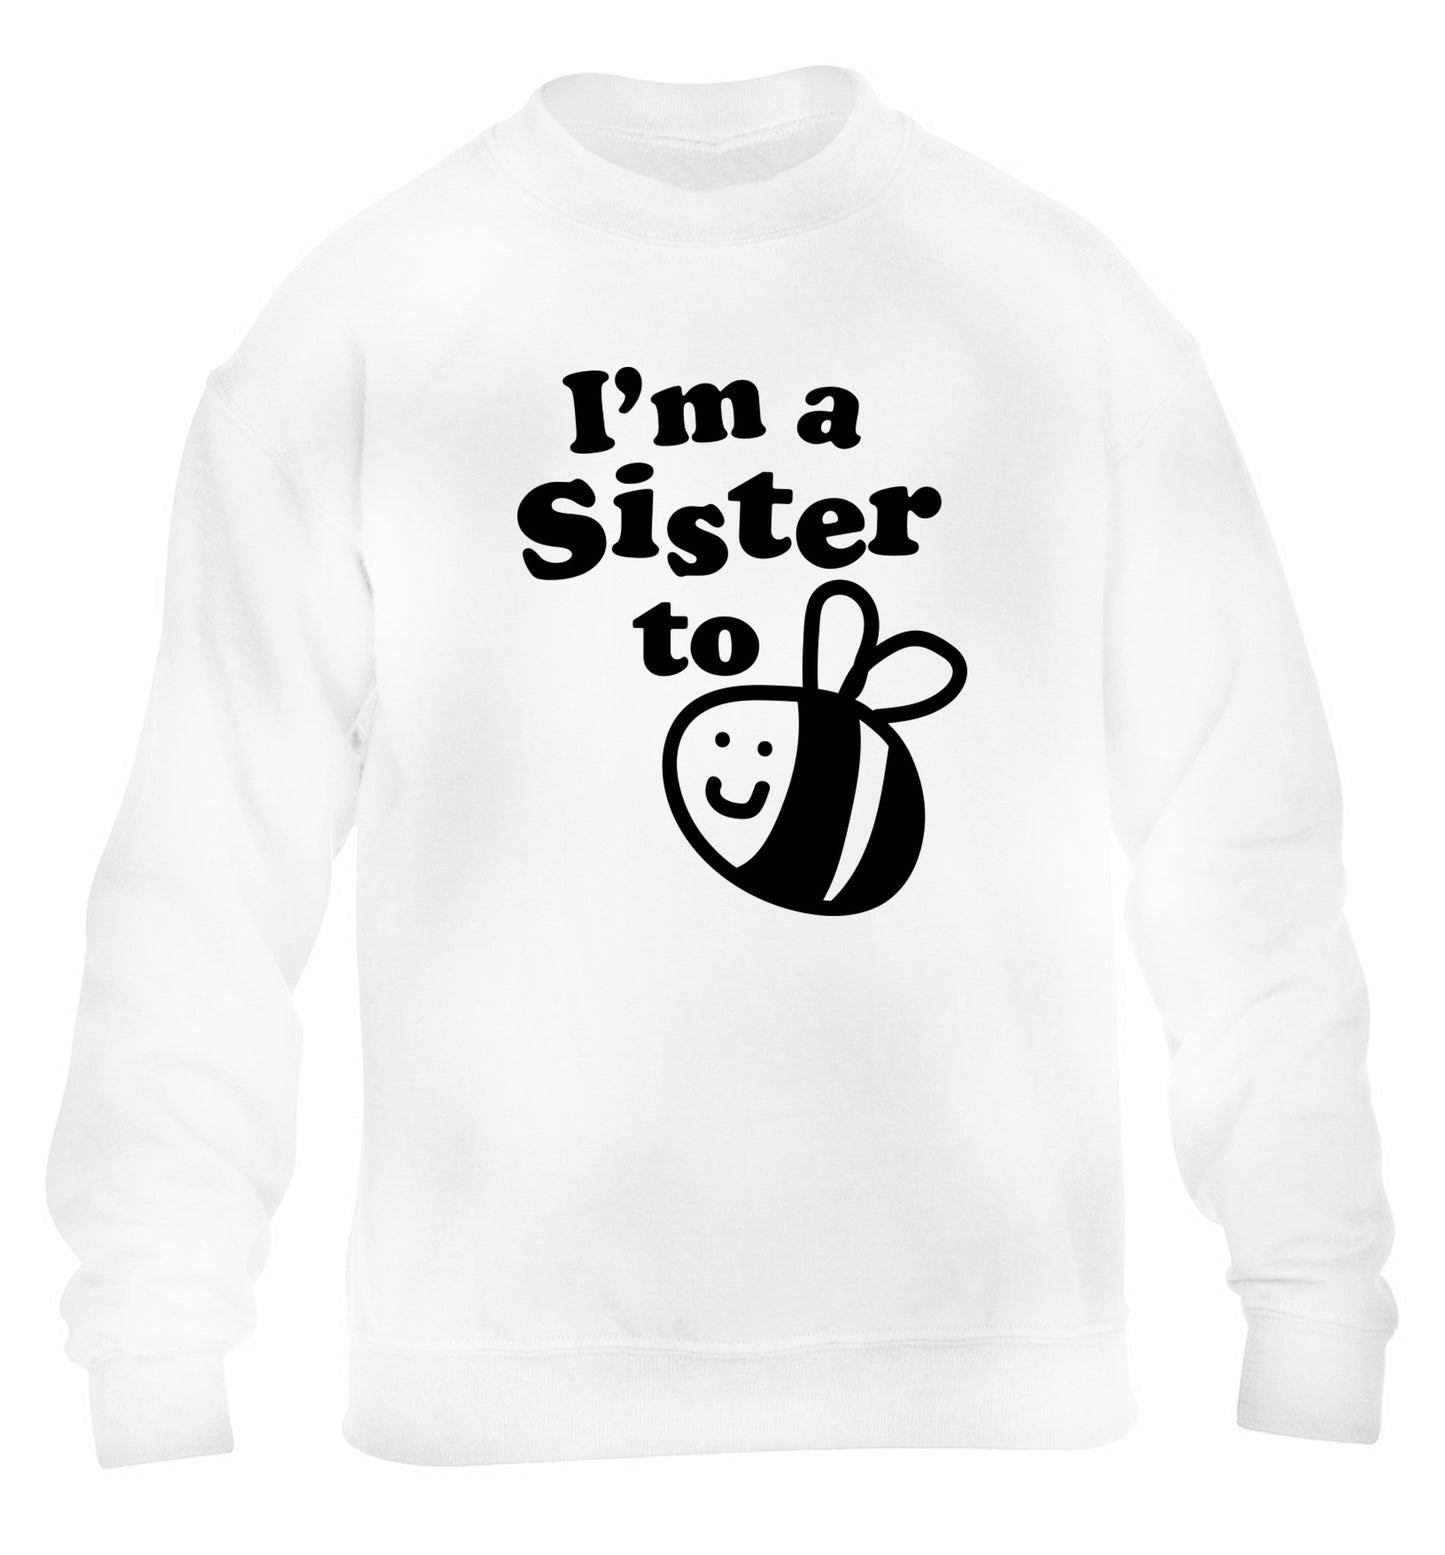 I'm a sister to be children's white sweater 12-14 Years